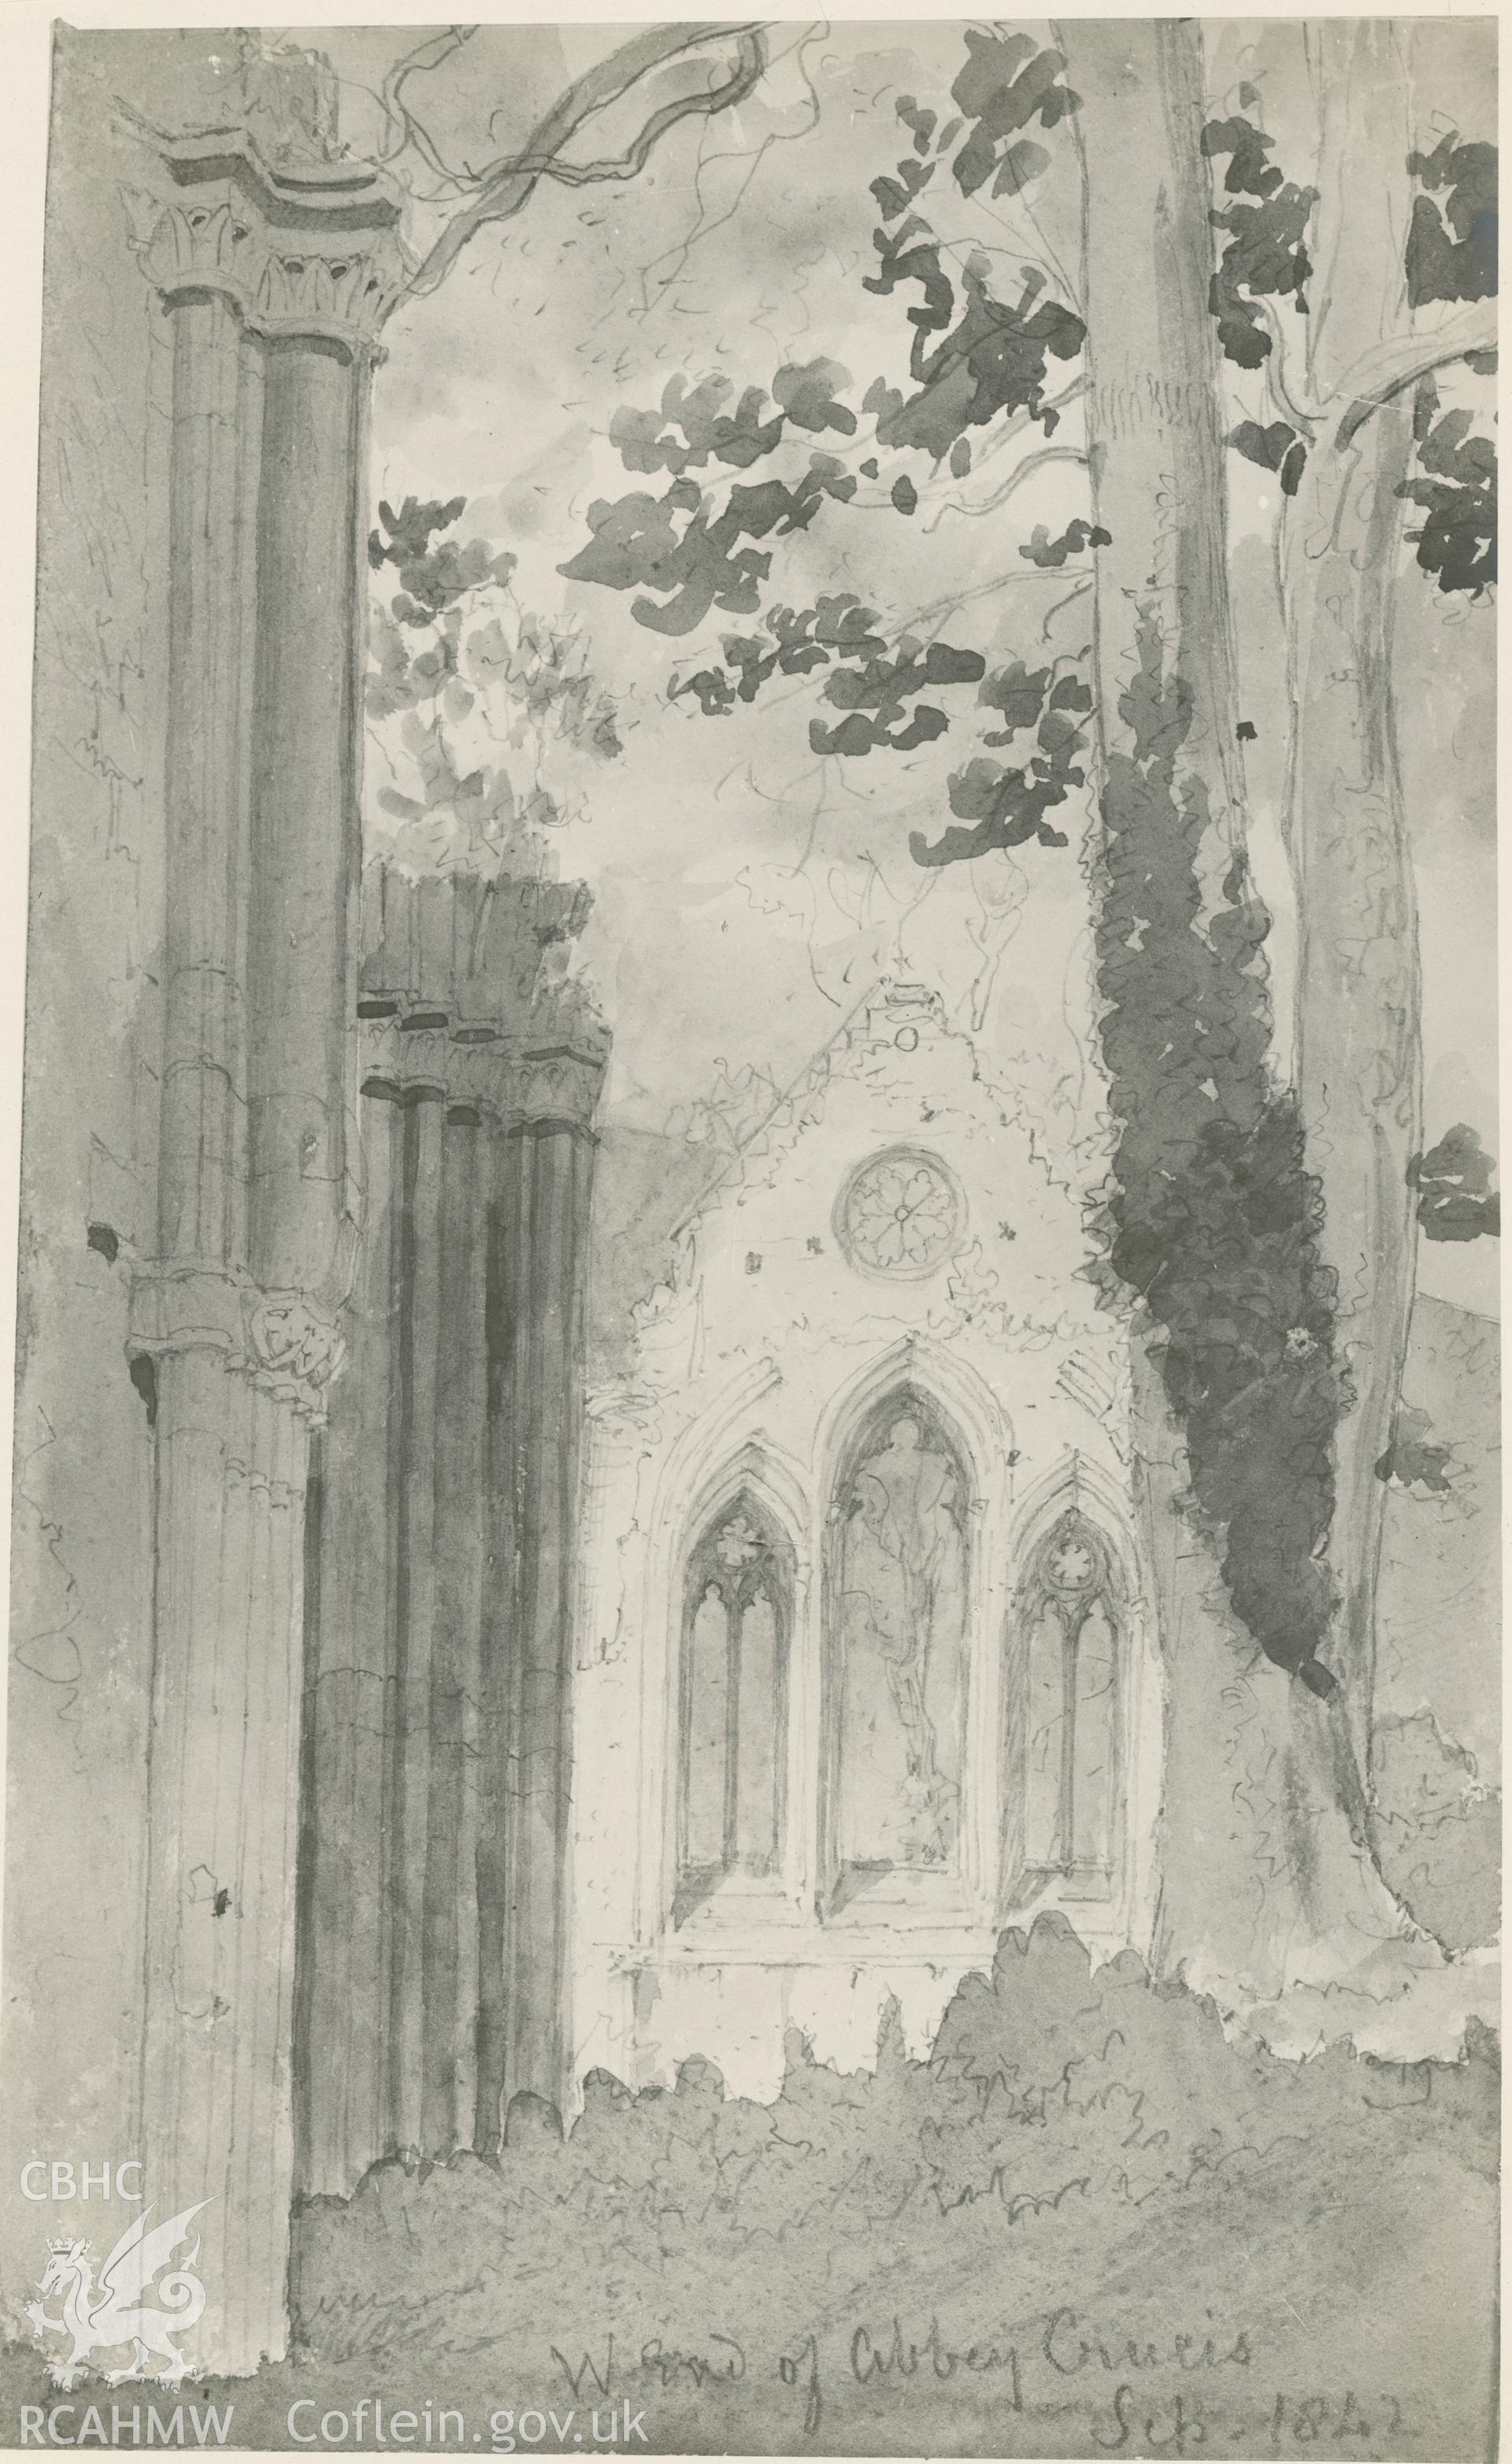 Photographic print by Macbeth of a pencil sketch dated Sep 1842, showing gable at Valle Crucis Abbey.